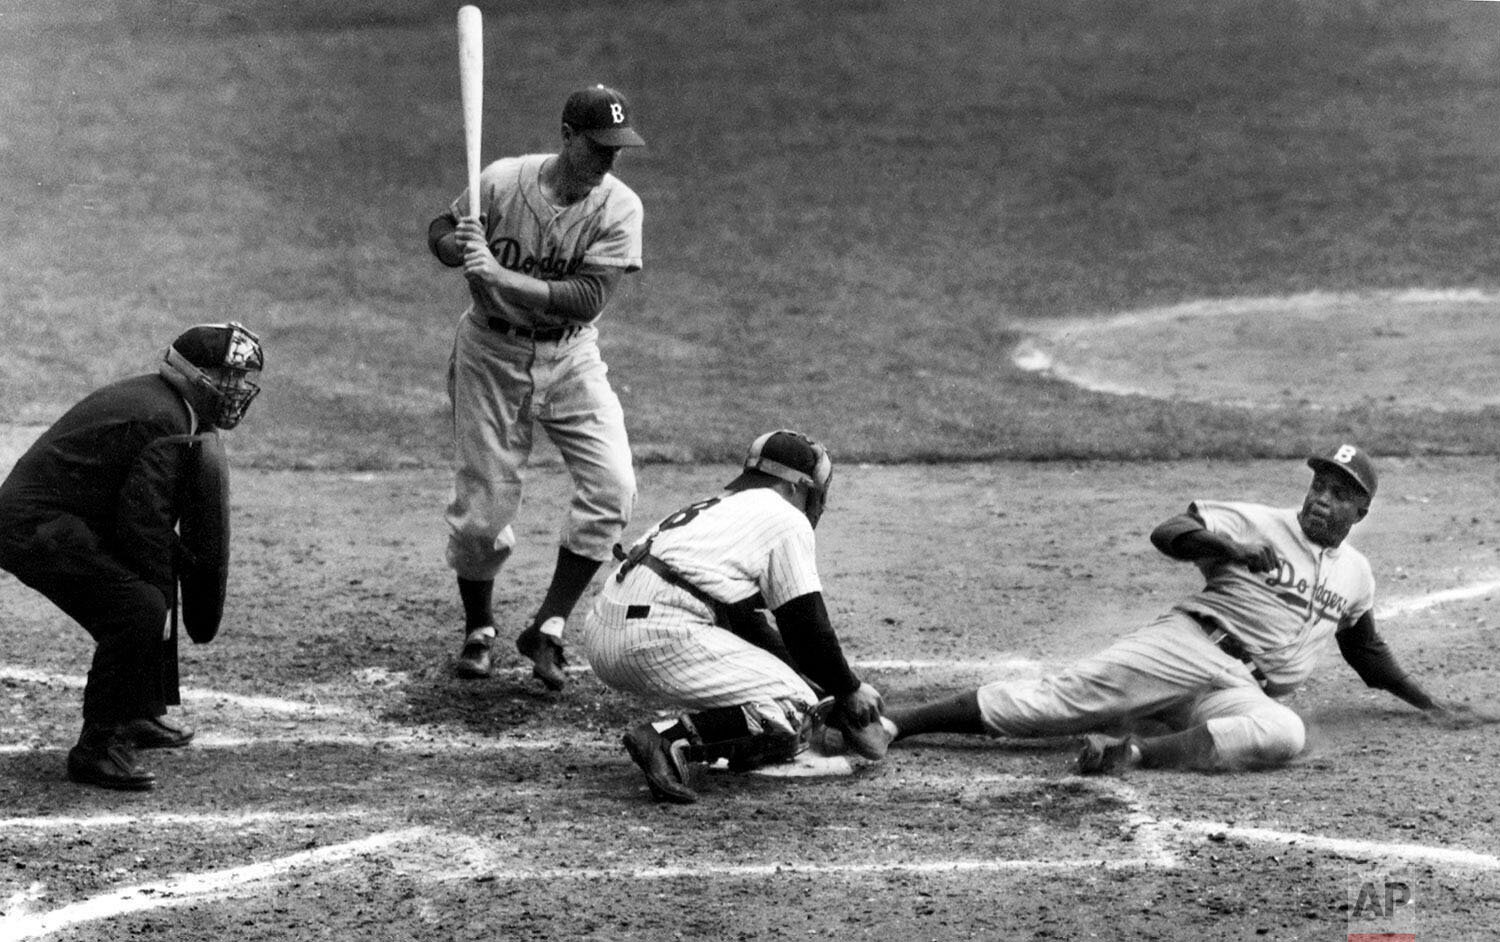  Brooklyn Dodgers' Jackie Robinson safely steals home plate under the tag of New York Yankees catcher Yogi Berra in the eighth inning of the World Series opener at New York's Yankee Stadium, Sept. 28, 1955.   (AP Photo/John Rooney) 